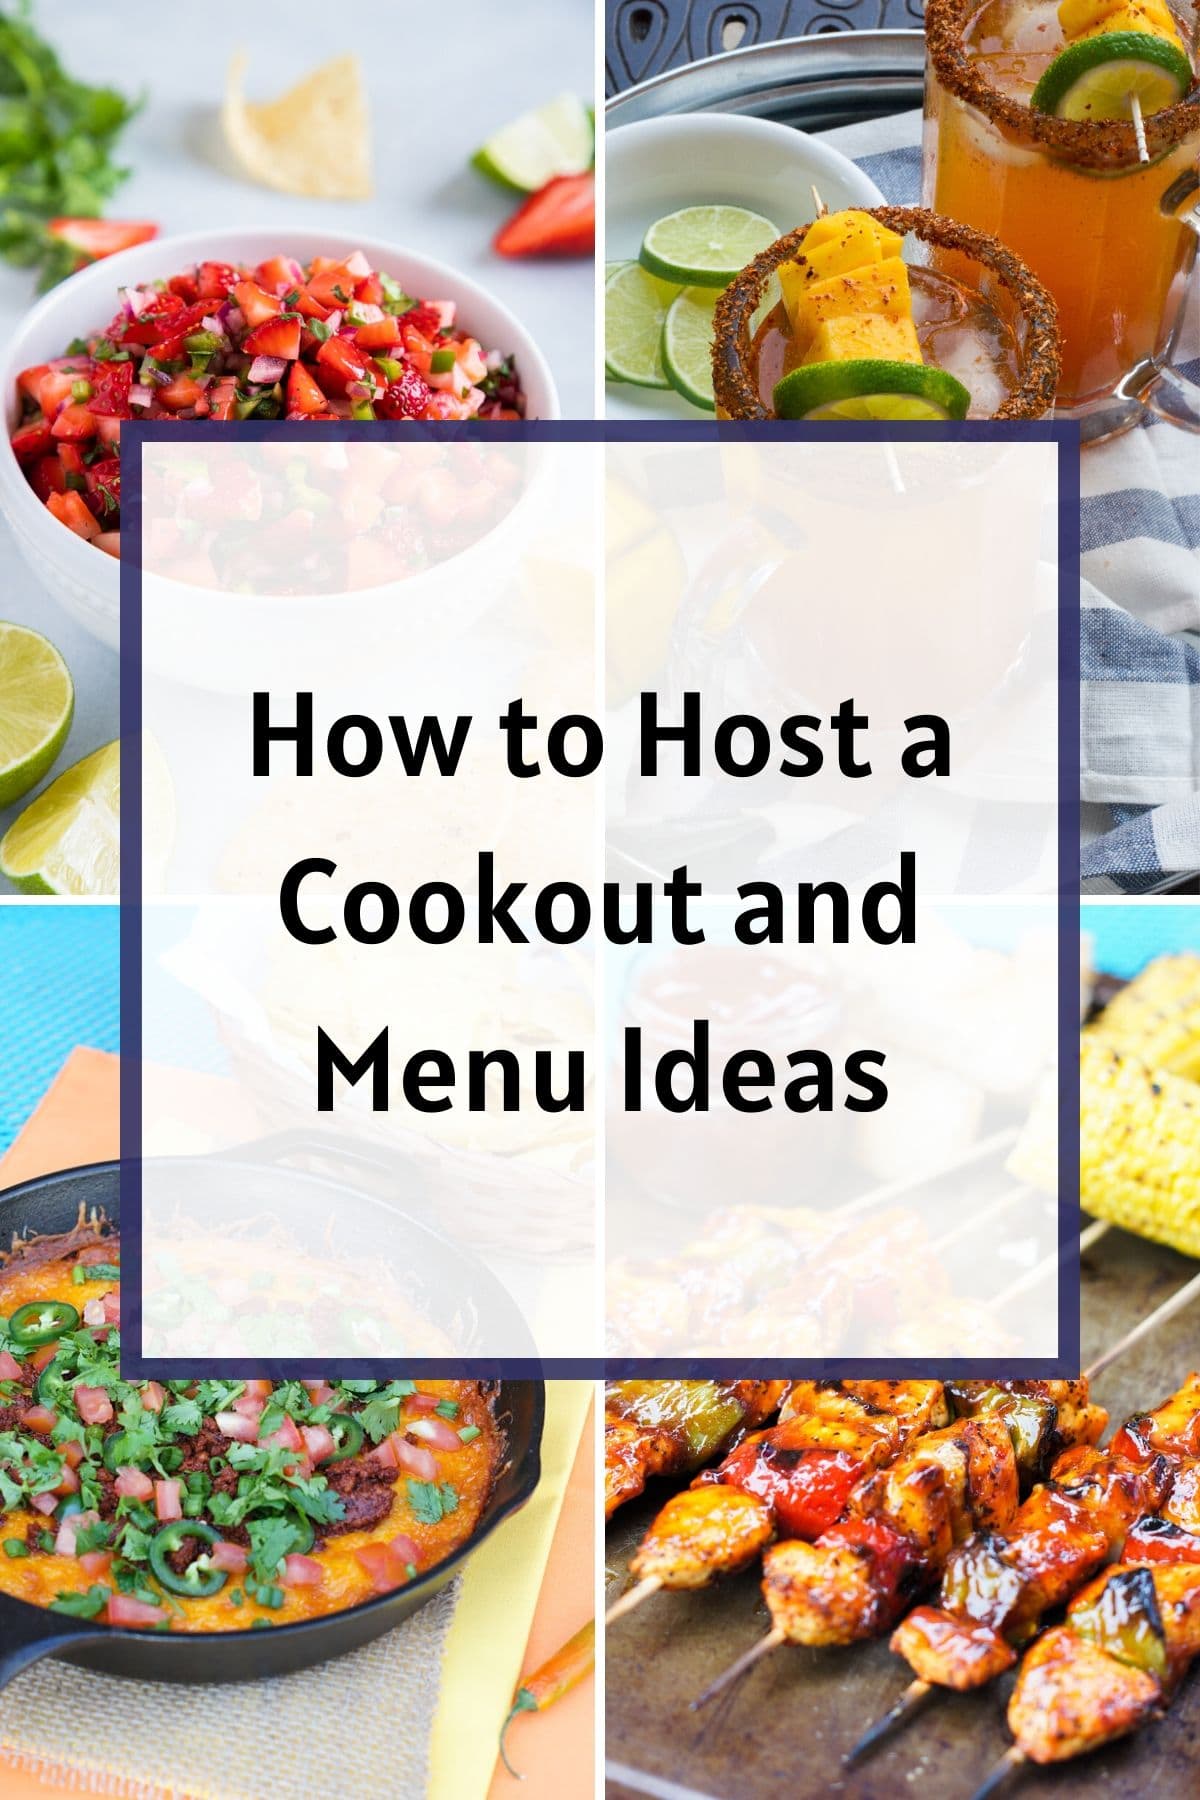 https://mydominicankitchen.com/wp-content/uploads/2020/06/Roundup-Collage-_-How-to-Host-a-Cookout.jpg